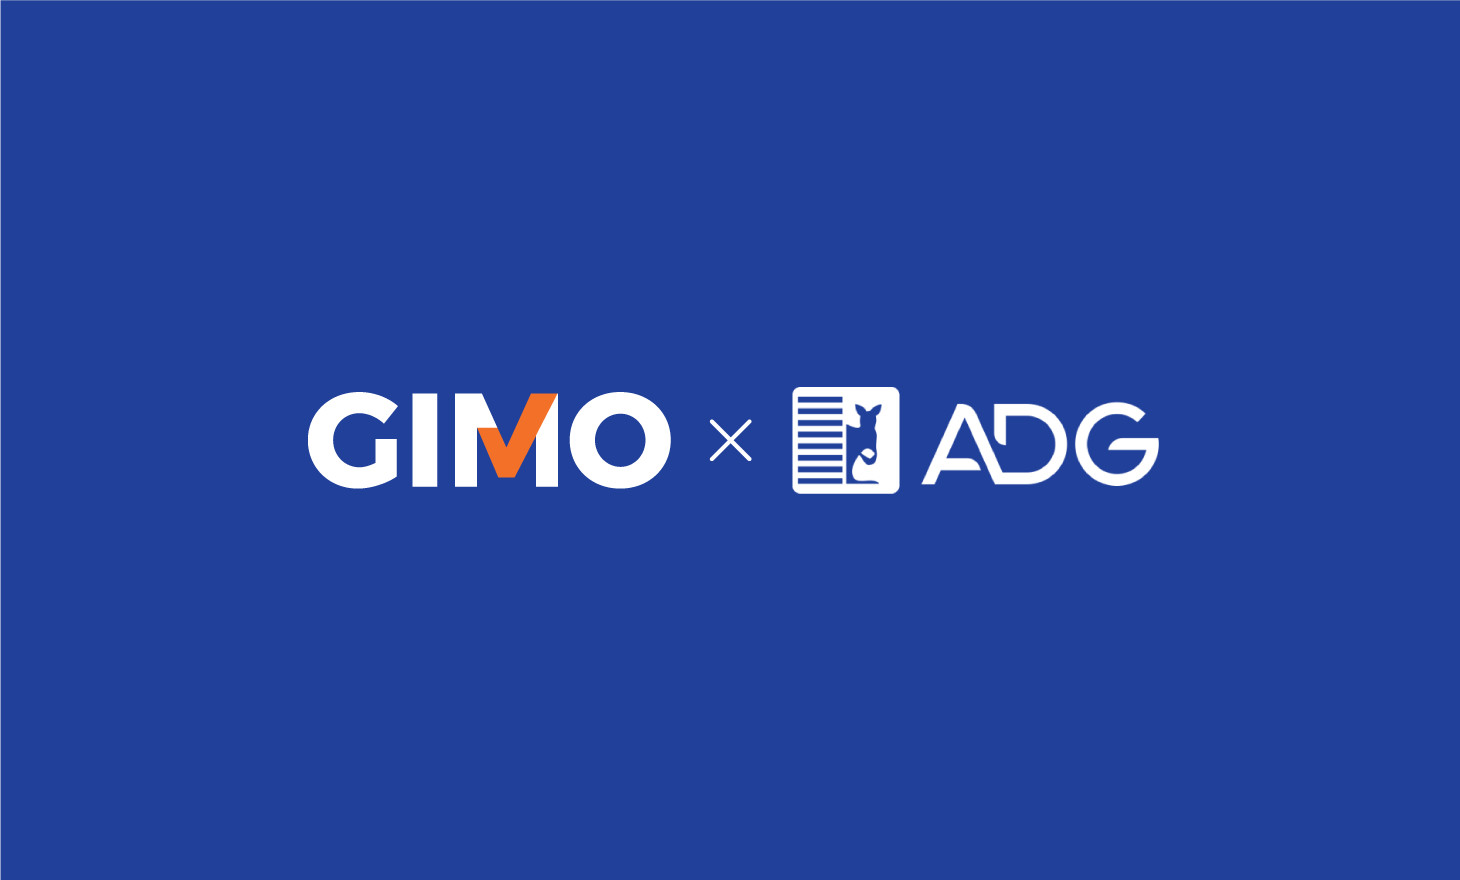 GIMO x ADG: A New Financial Welfare Program for One of The Top 500 Largest Enterprises in Vietnam